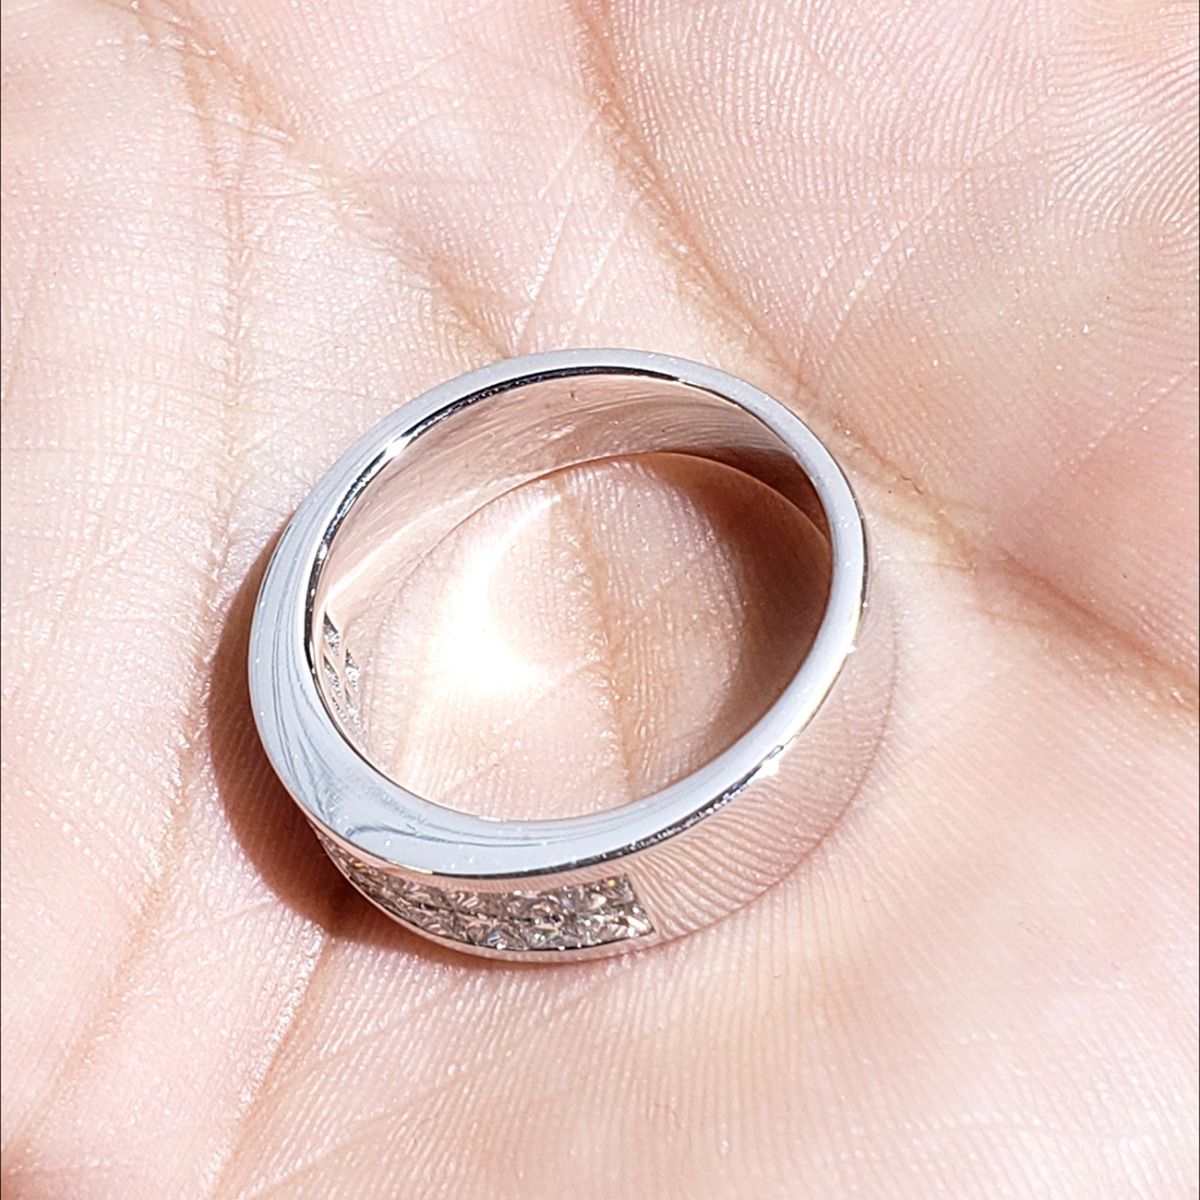 Invisible Princess Cut Men's Ring seen from a side angle.